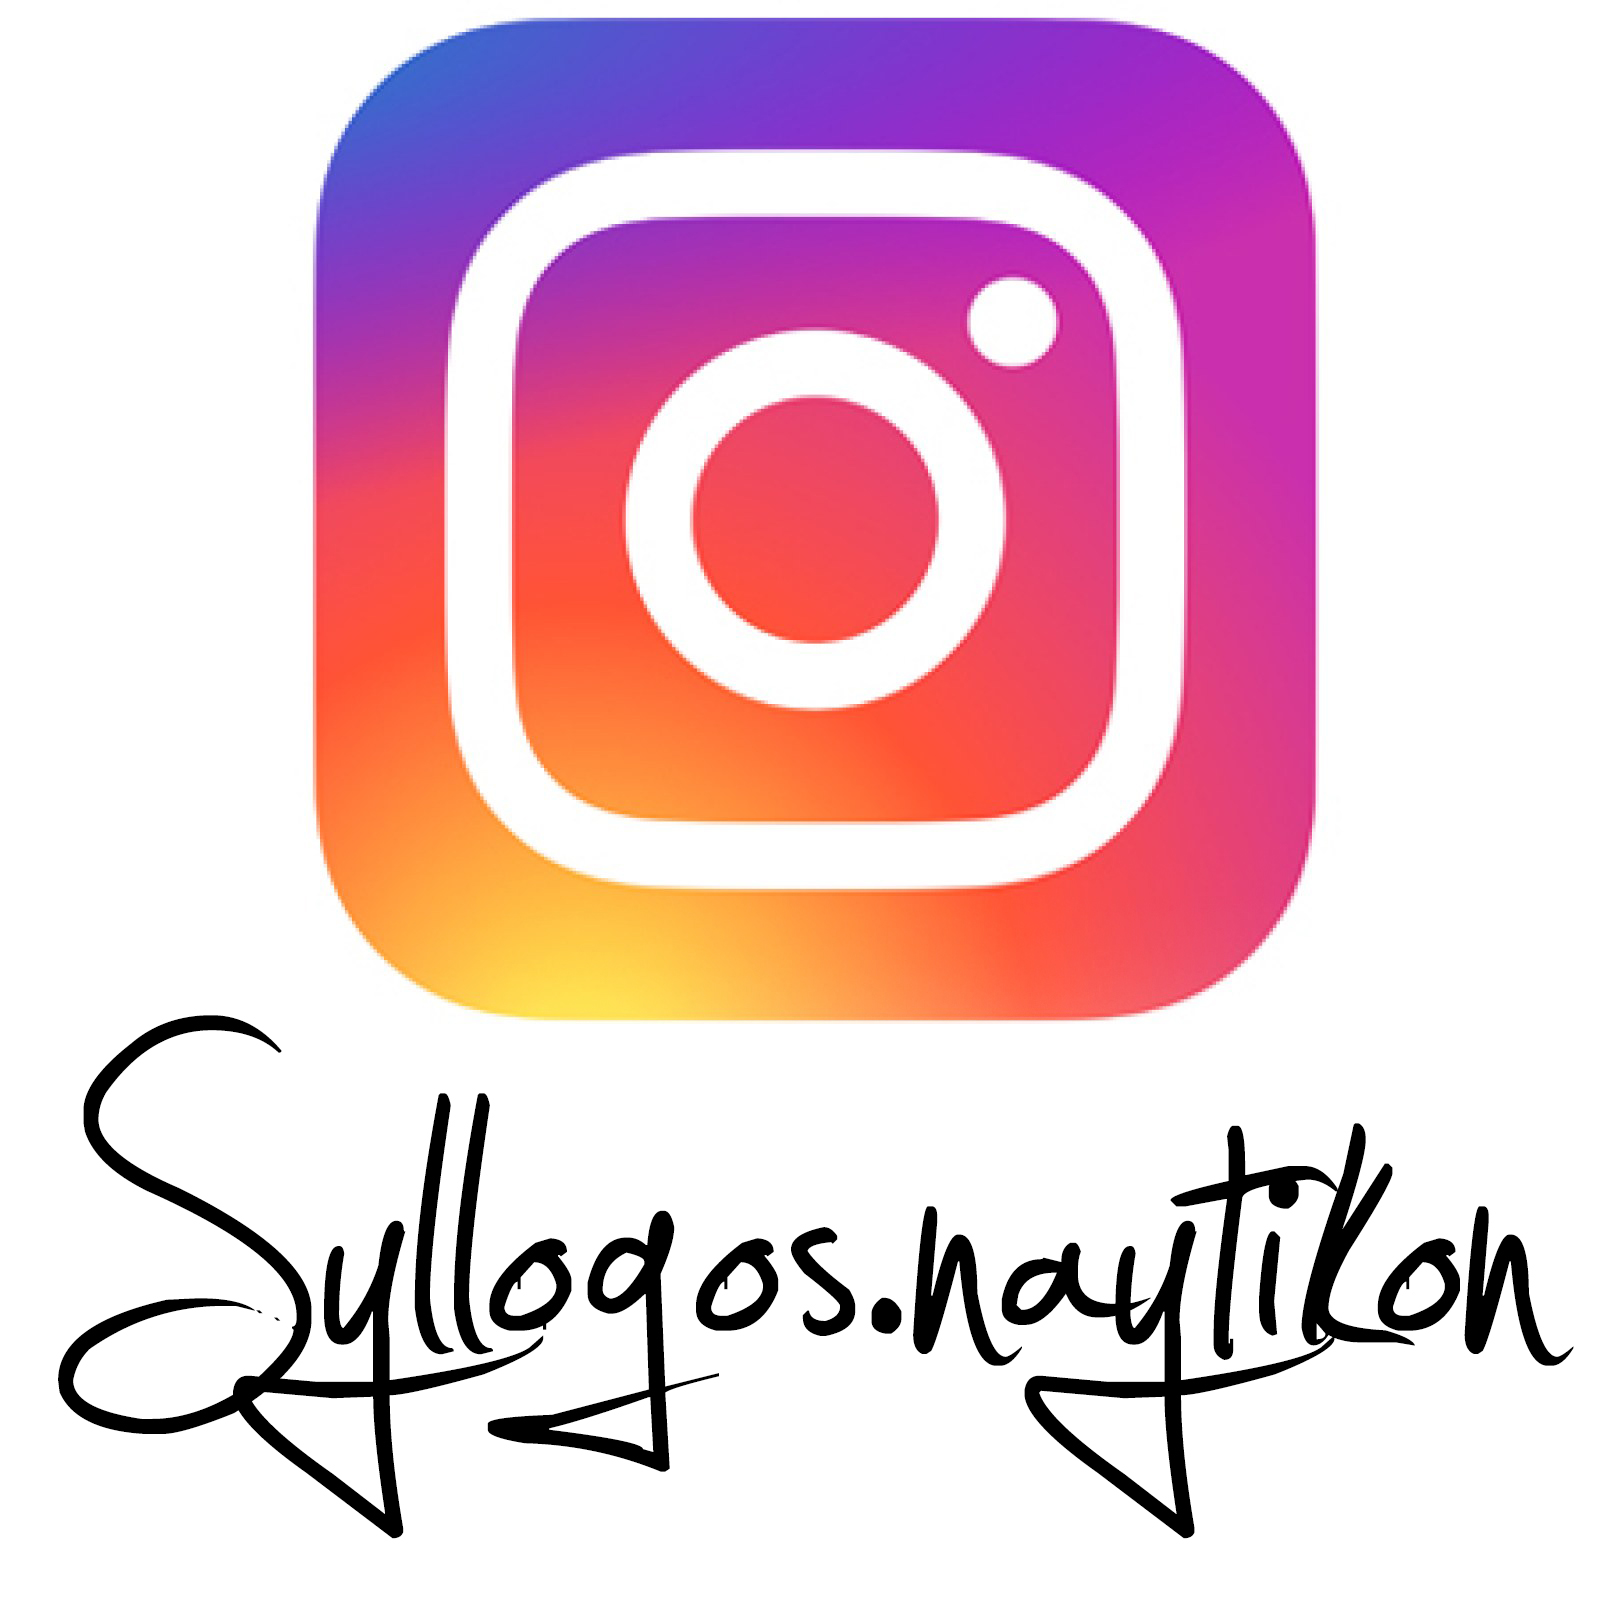 Instagram page